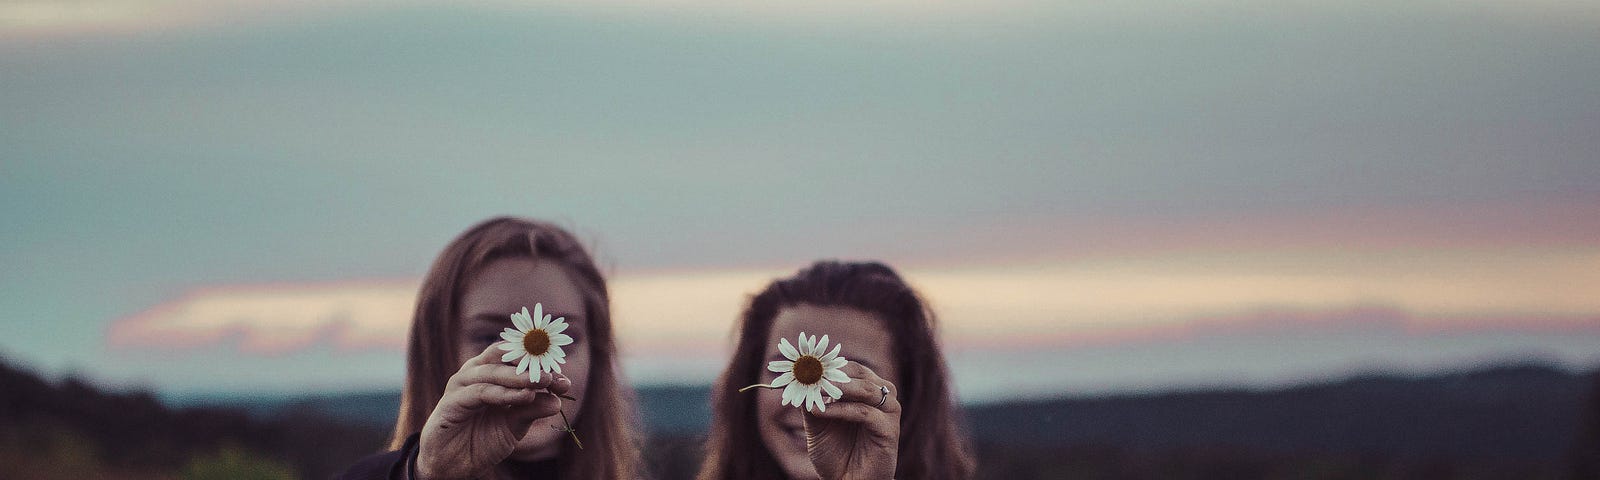 Two women holding daisies in front of their faces.